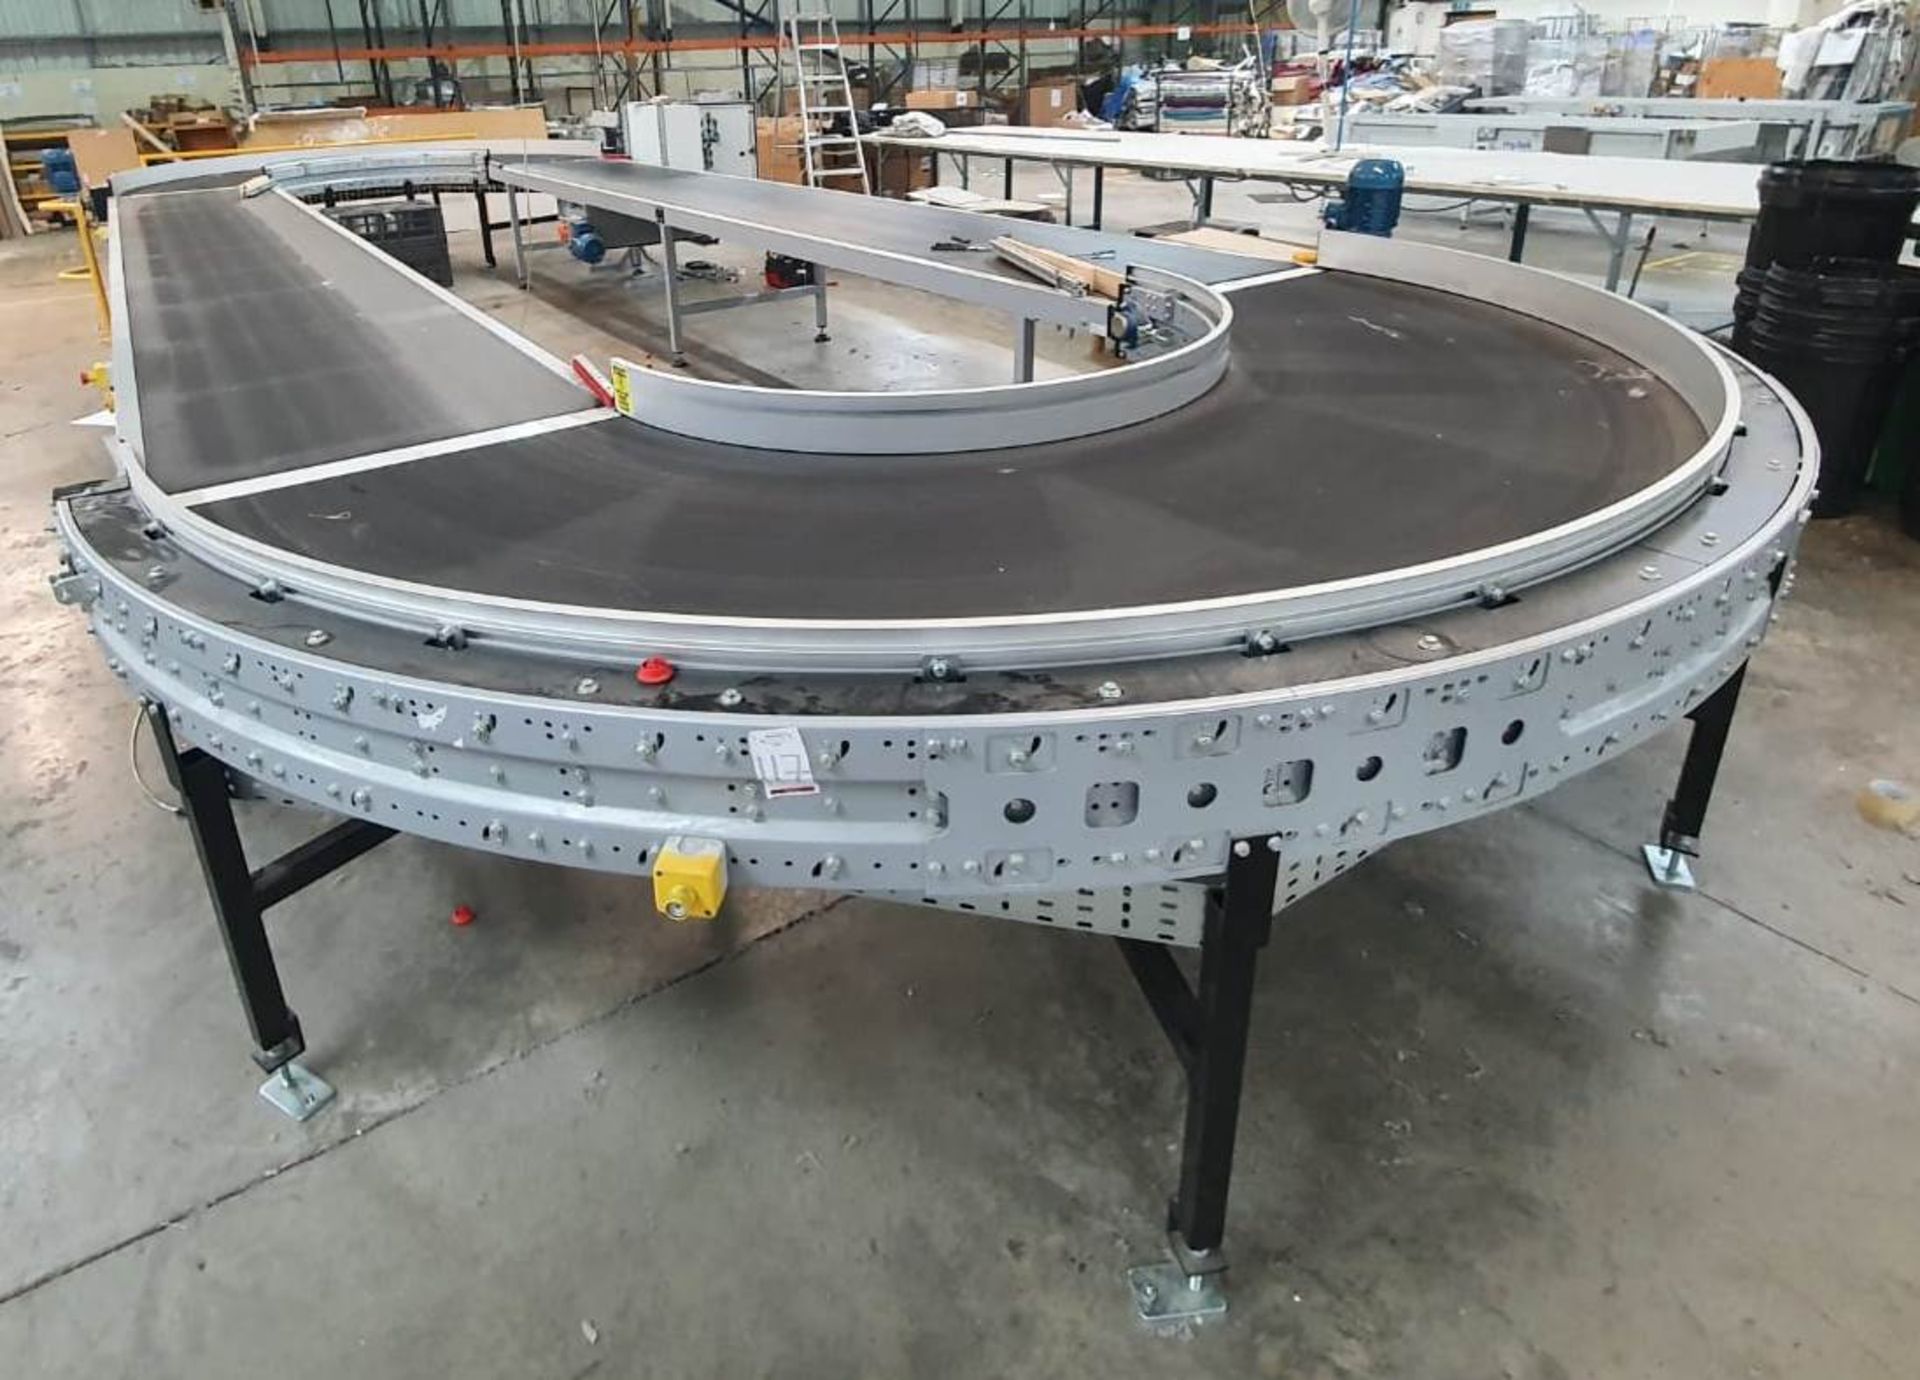 4 Sectional Belt Conveyor/Carousel System - Image 2 of 6